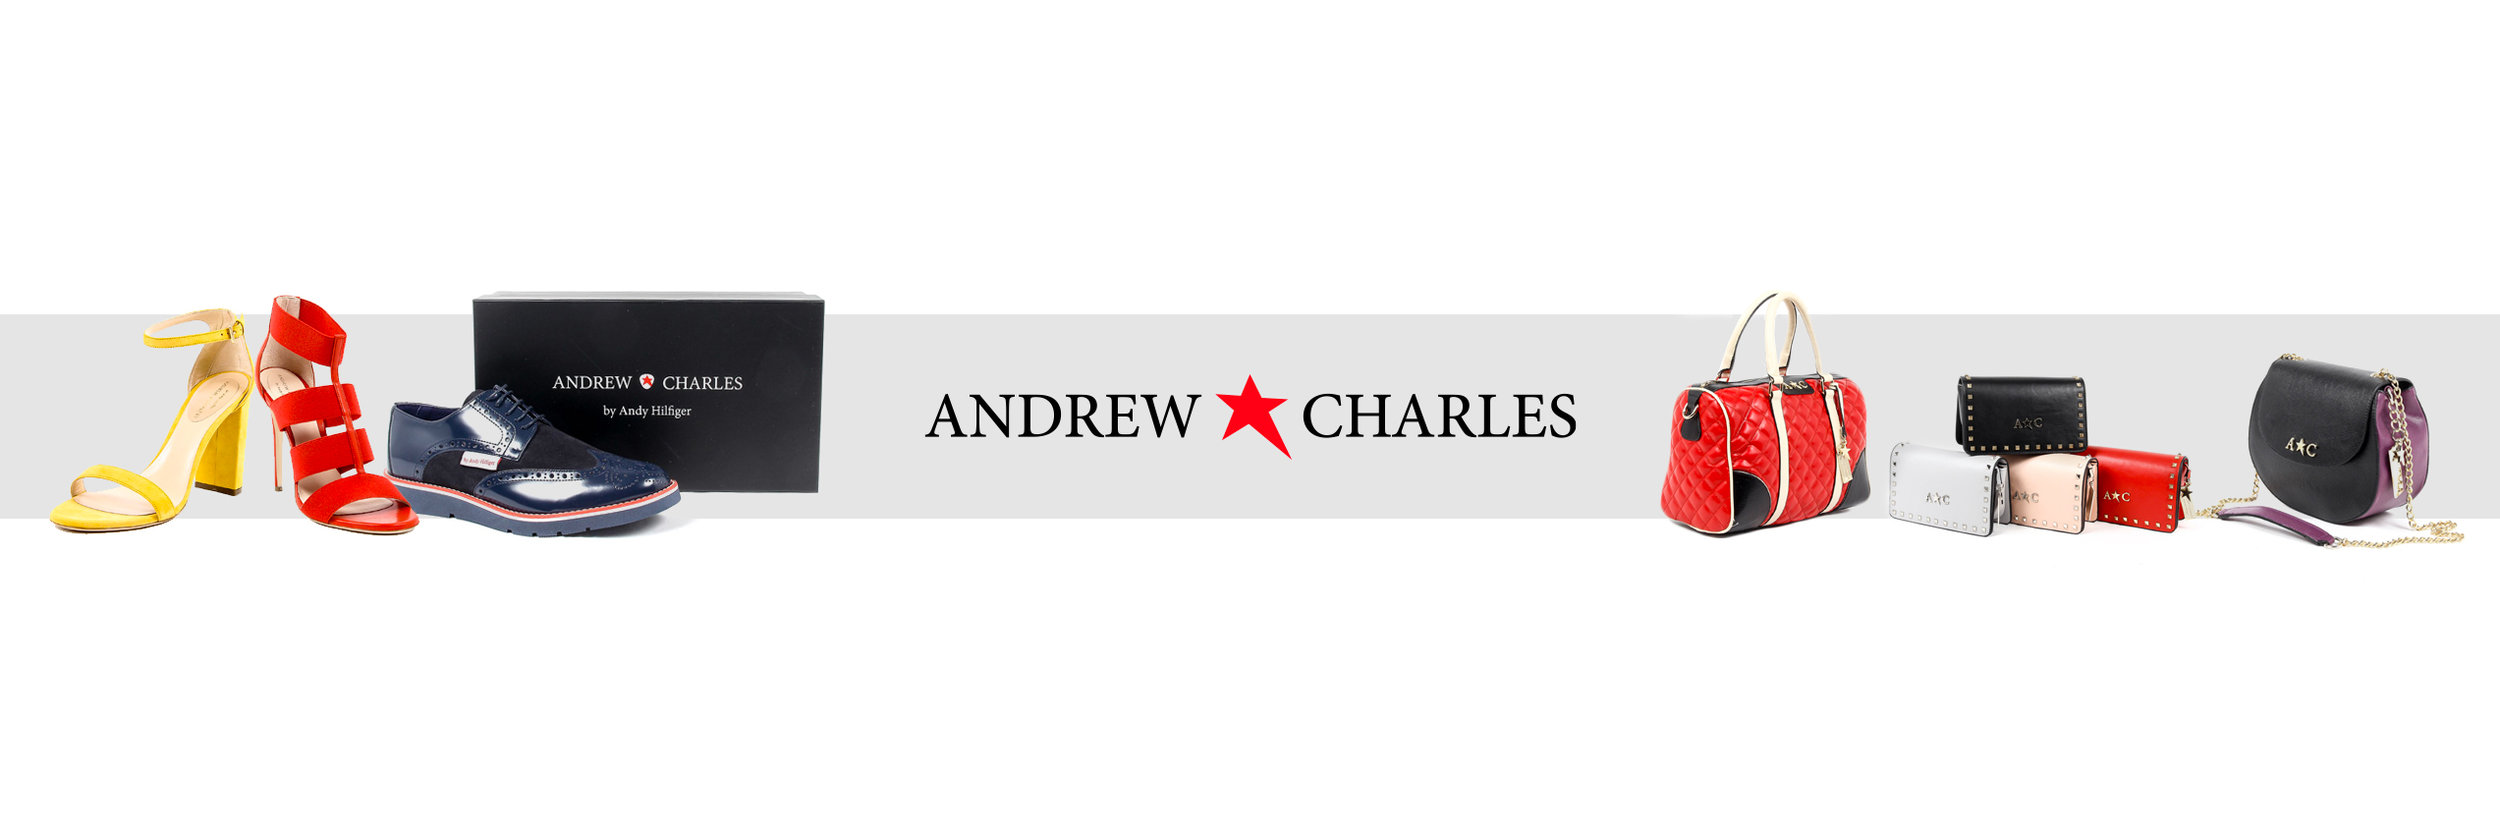 andrew charles by andy hilfiger bags,OFF 50%,Enjoy Free Delivery